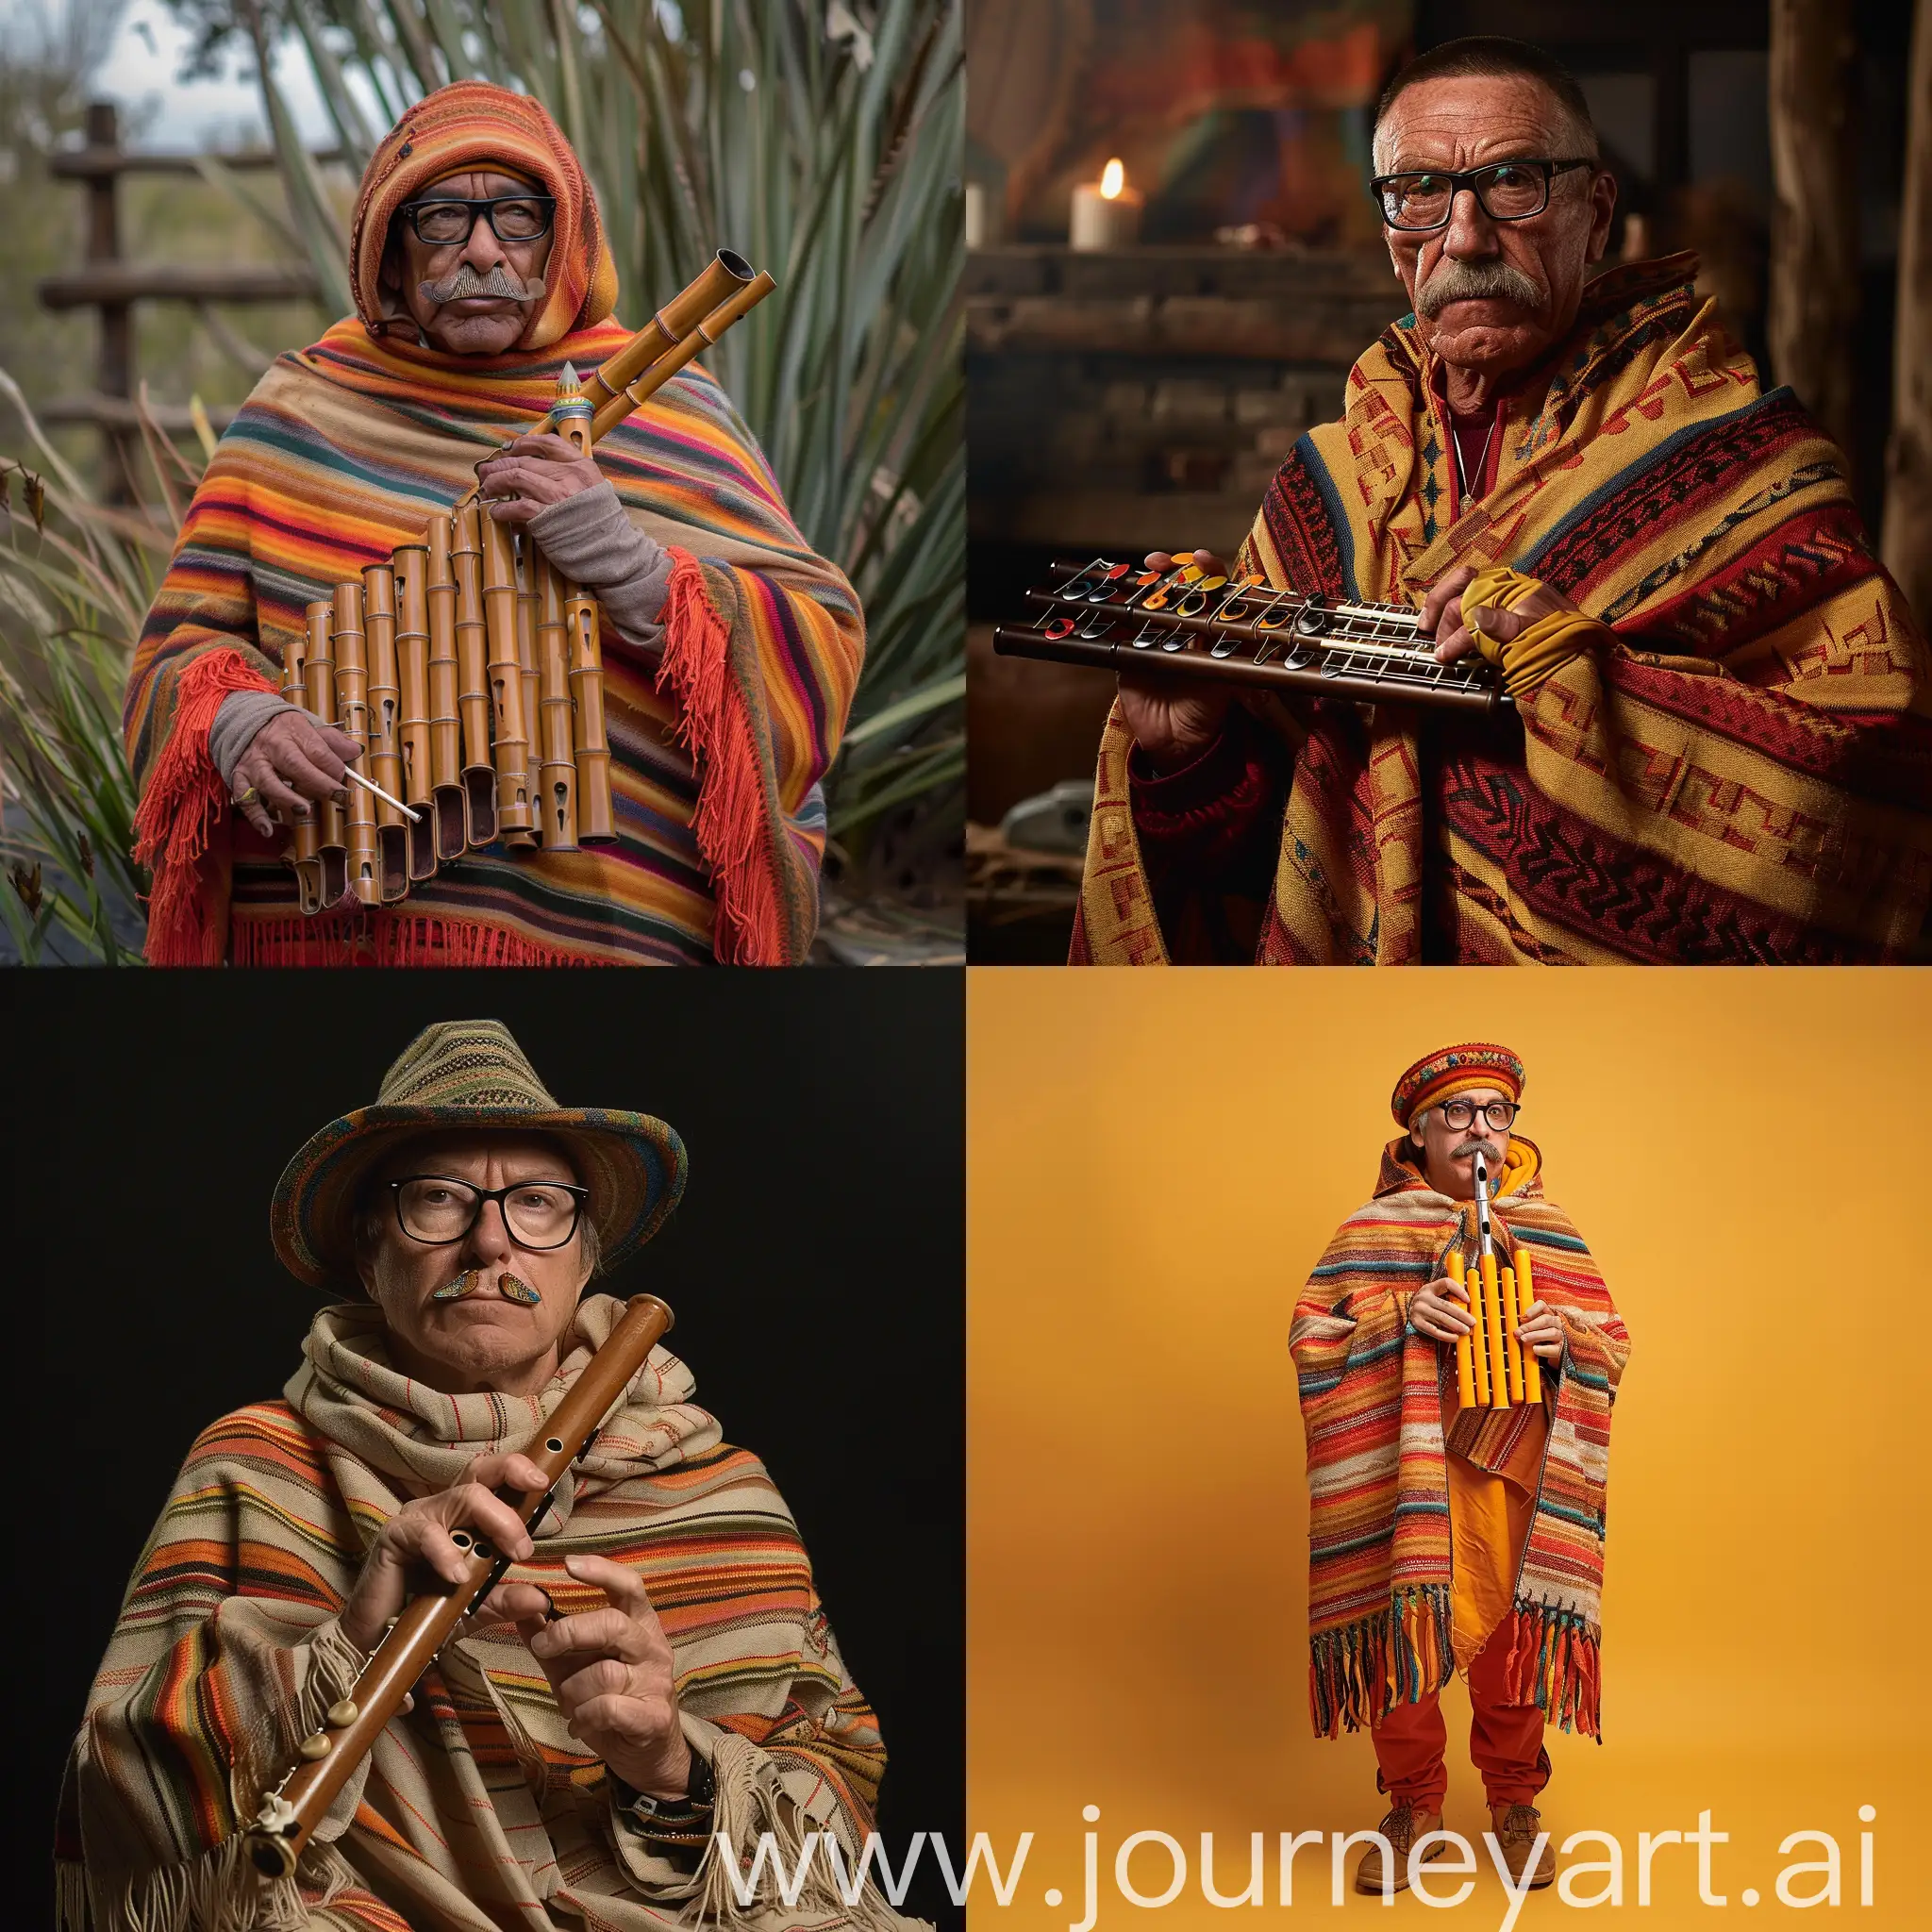 Risitas disguised as Heisenberg but Peruvian, with a poncho and pan flute